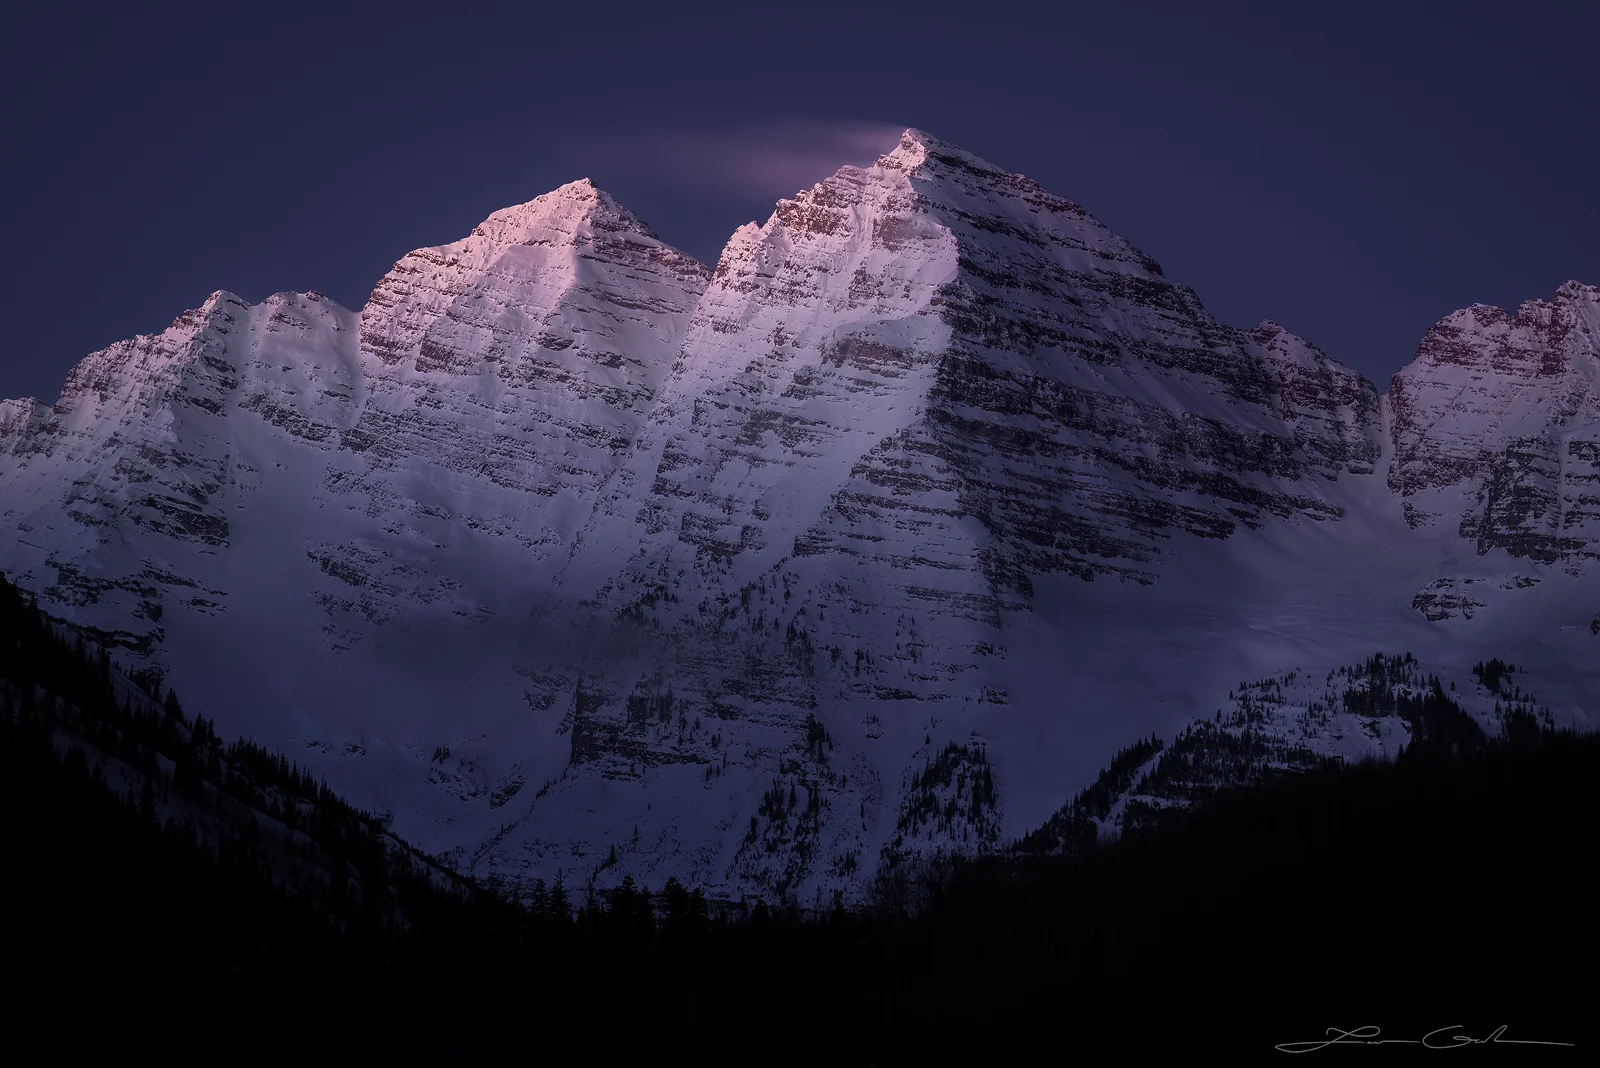 Maroon Bells at dawn in winter, with soft light revealing the peaks and a surreal flow of snow in the air. - Gintchin Fine Art